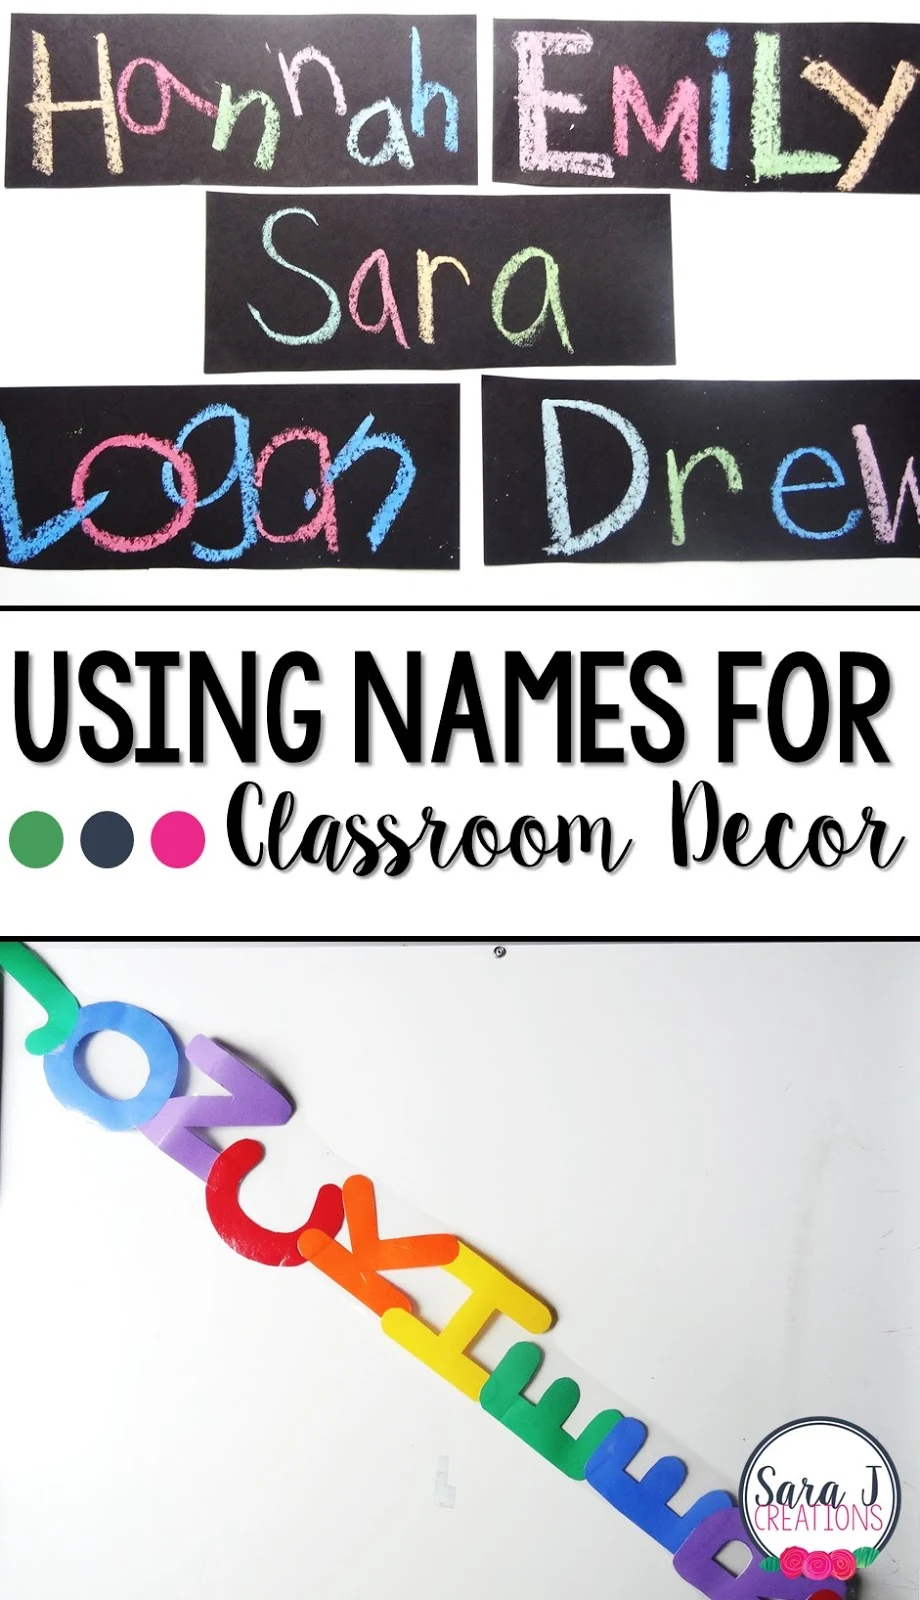 Need some ideas for DIY classroom decor for an elementary classroom?  I love using student names as part of the decor!  Great way to start off the back to school season with your students.